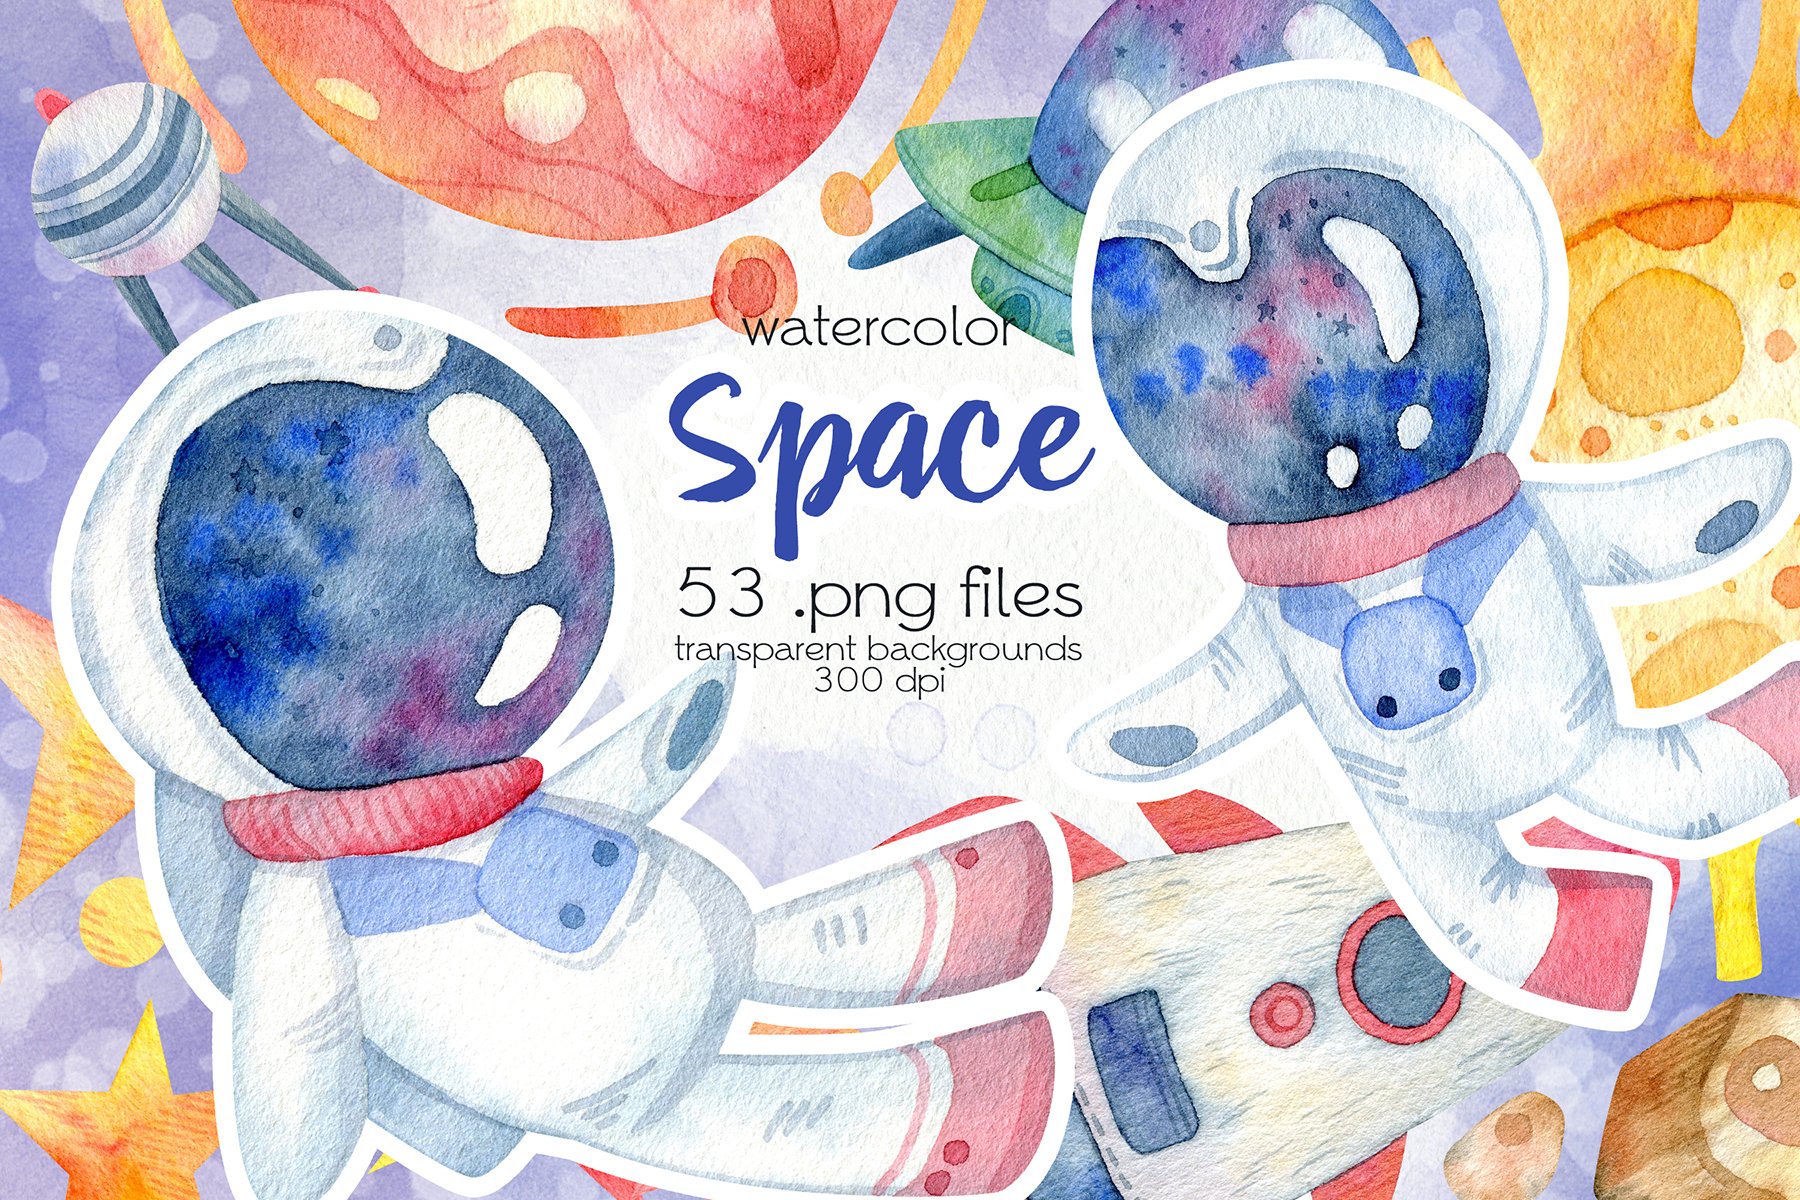 Watercolor Space Clipart cover image.